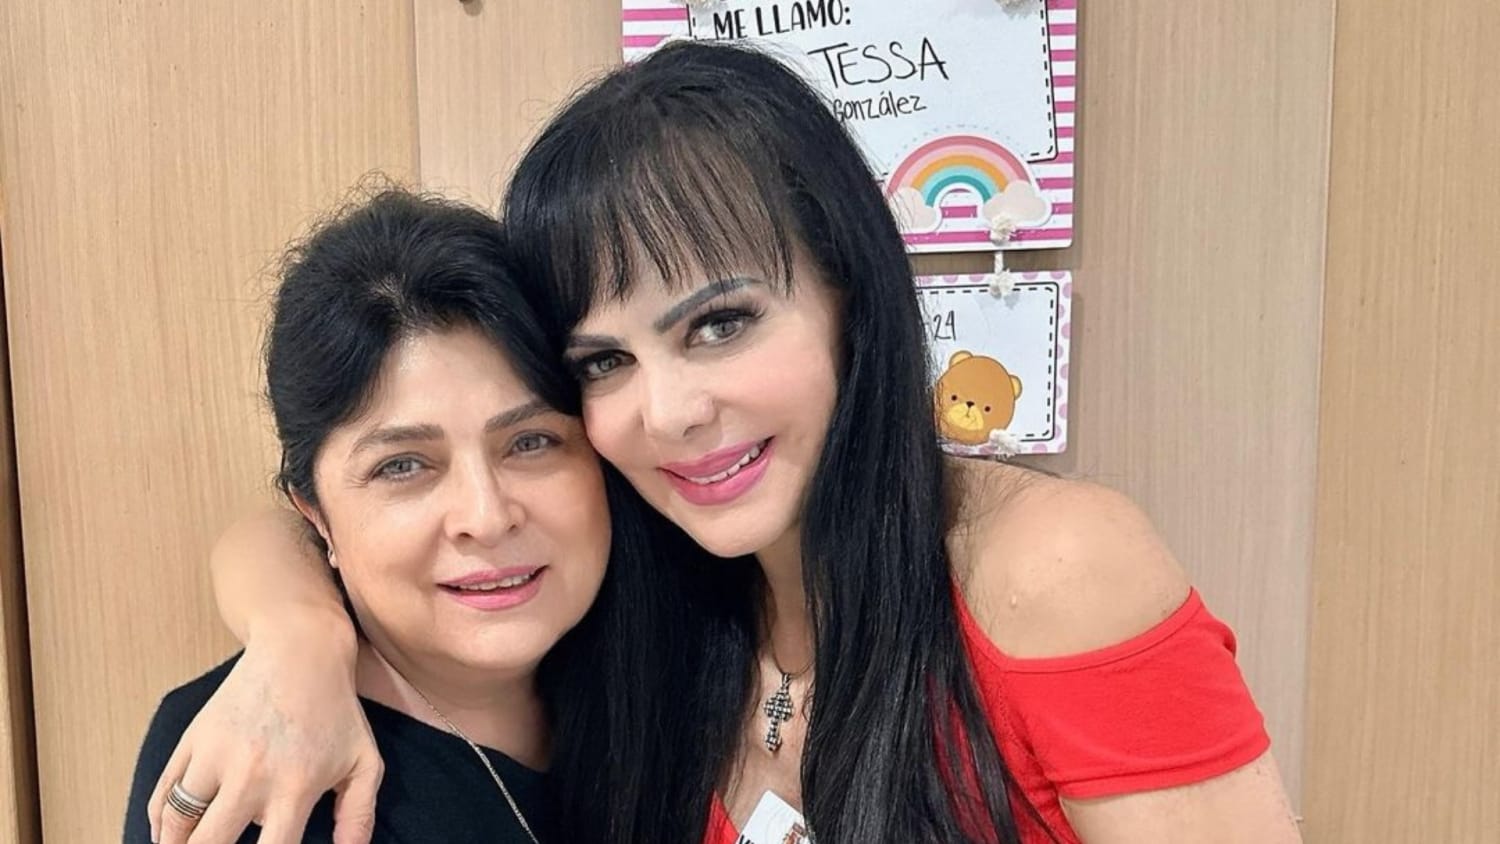 Maribel Guardia meets Victoria Rufo's granddaughter and cries over her